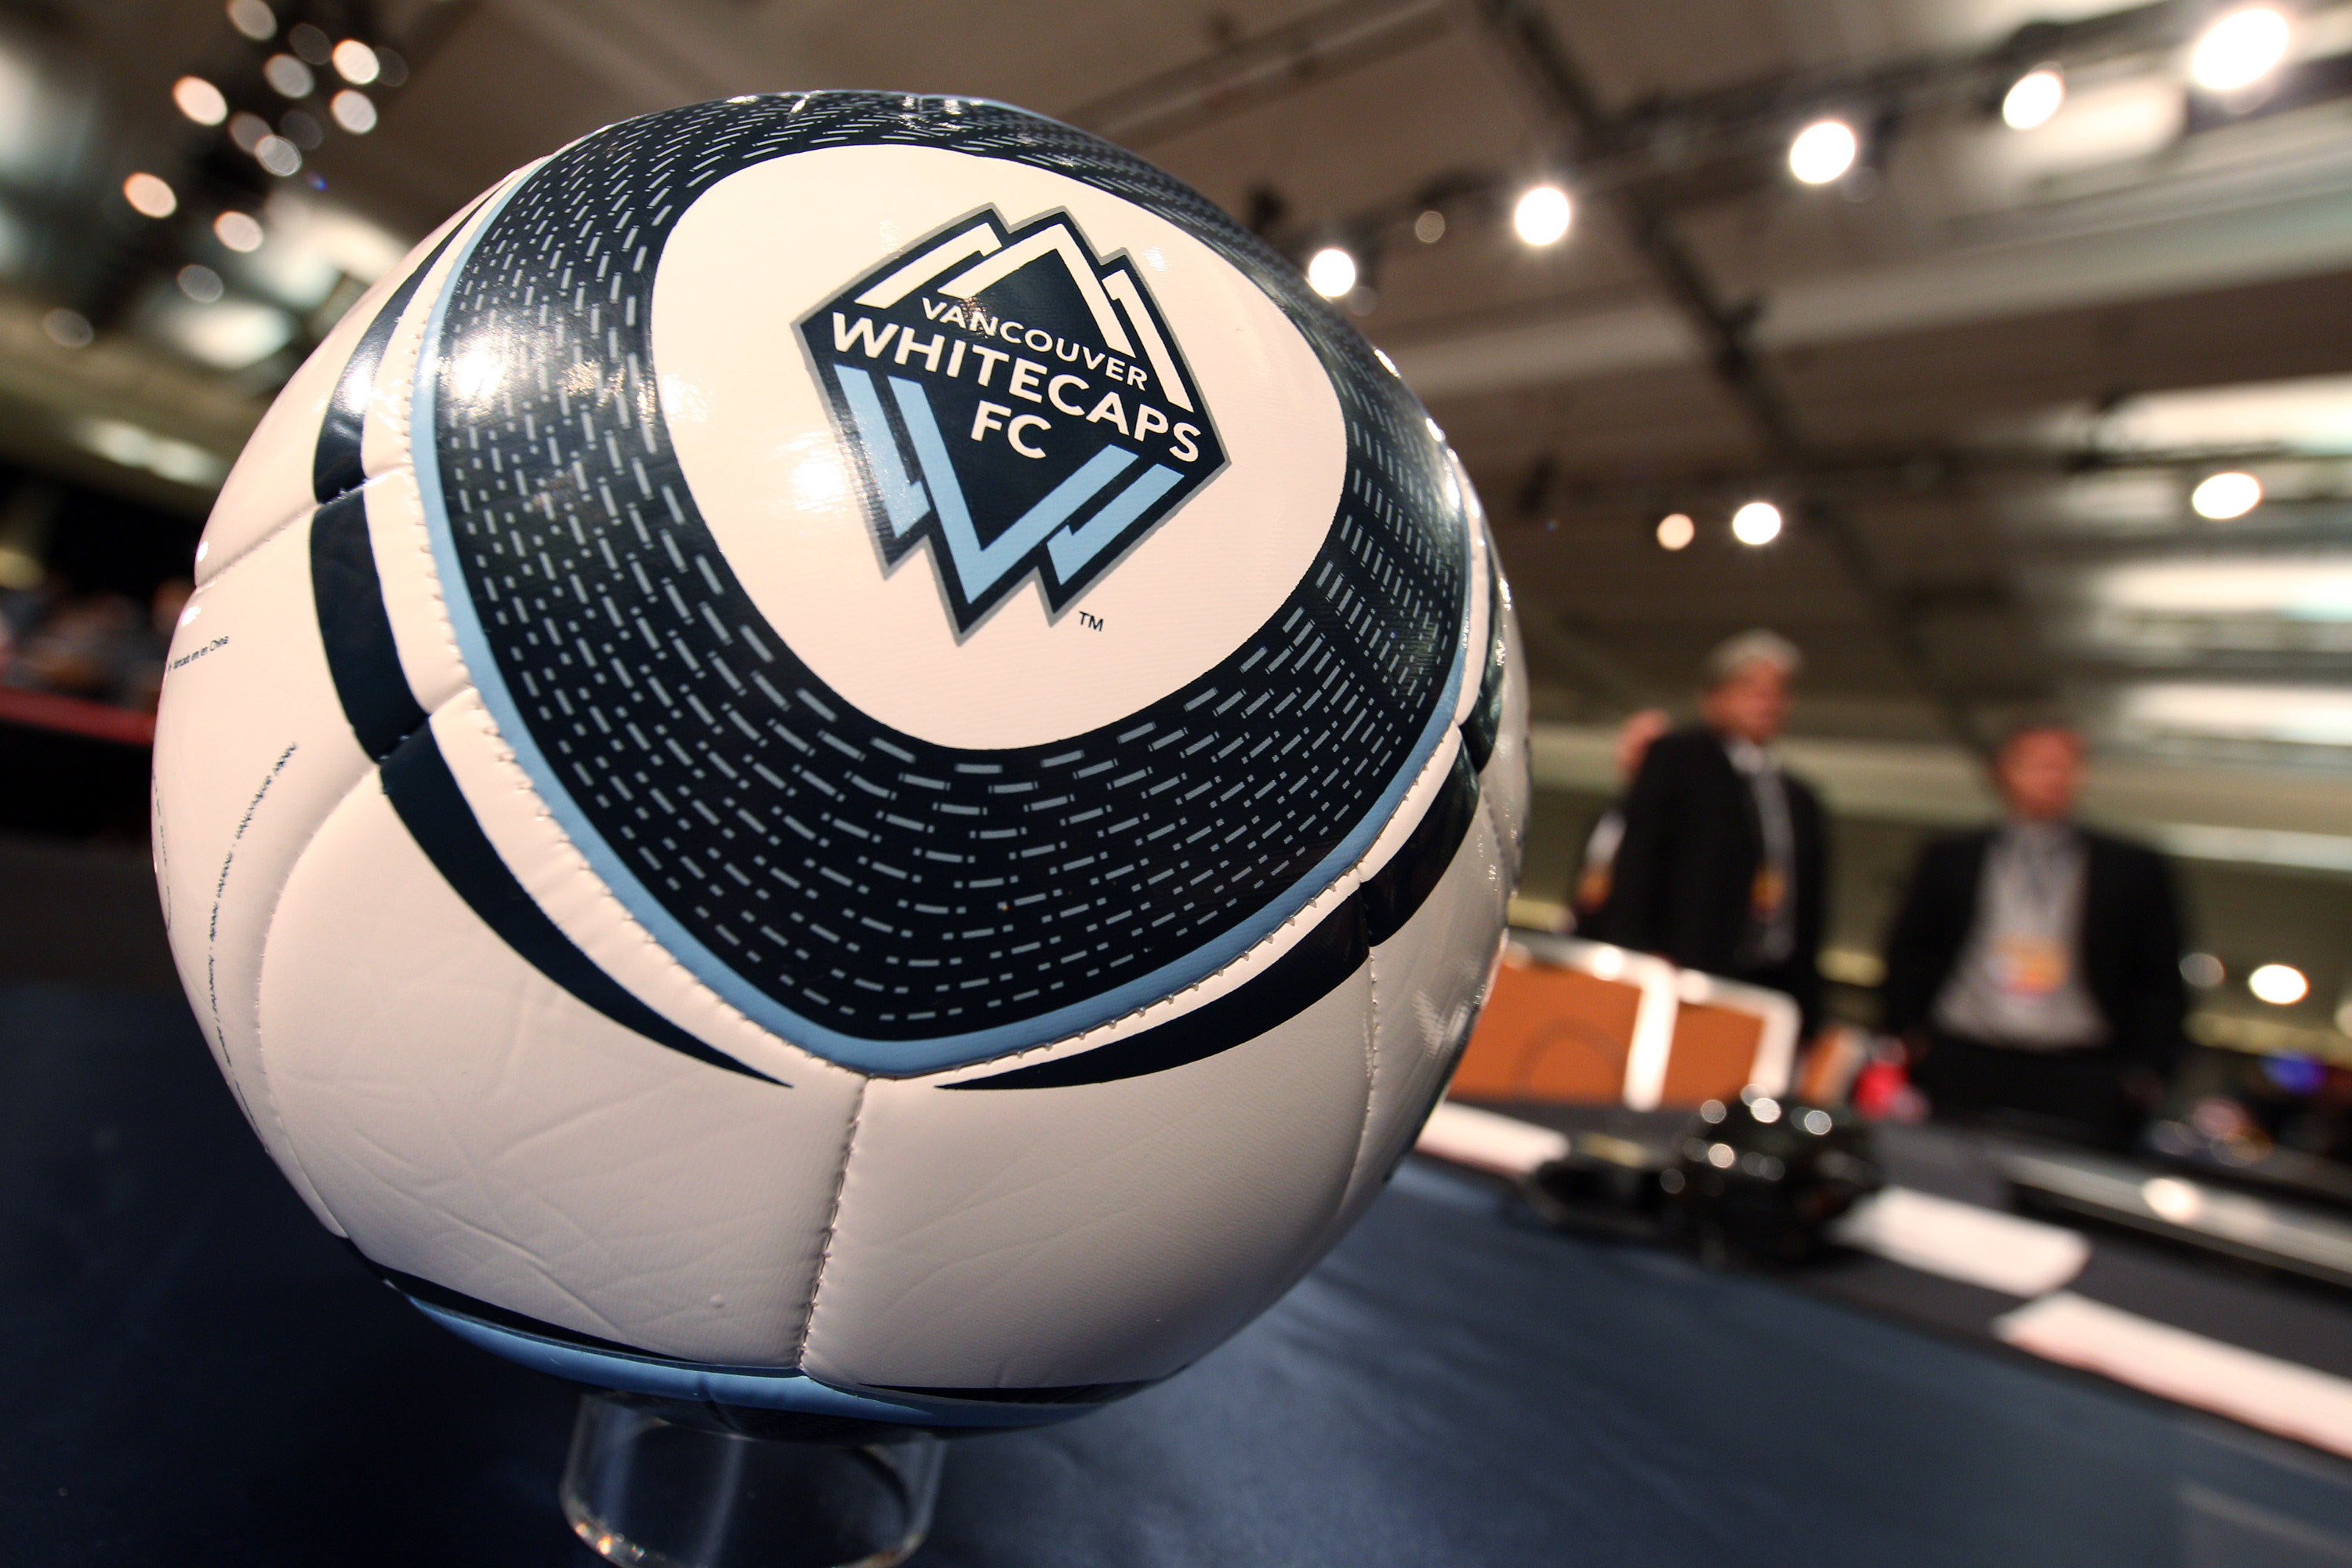 BALTIMORE - JANUARY 13: A view of the jerseys of the Vancouver Whitecaps logo and table during the 2011 MLS SuperDraft on January 13, 2011 at the Baltimore Convention Center in Baltimore, Maryland. (Photo by Ned Dishman/Getty Images)